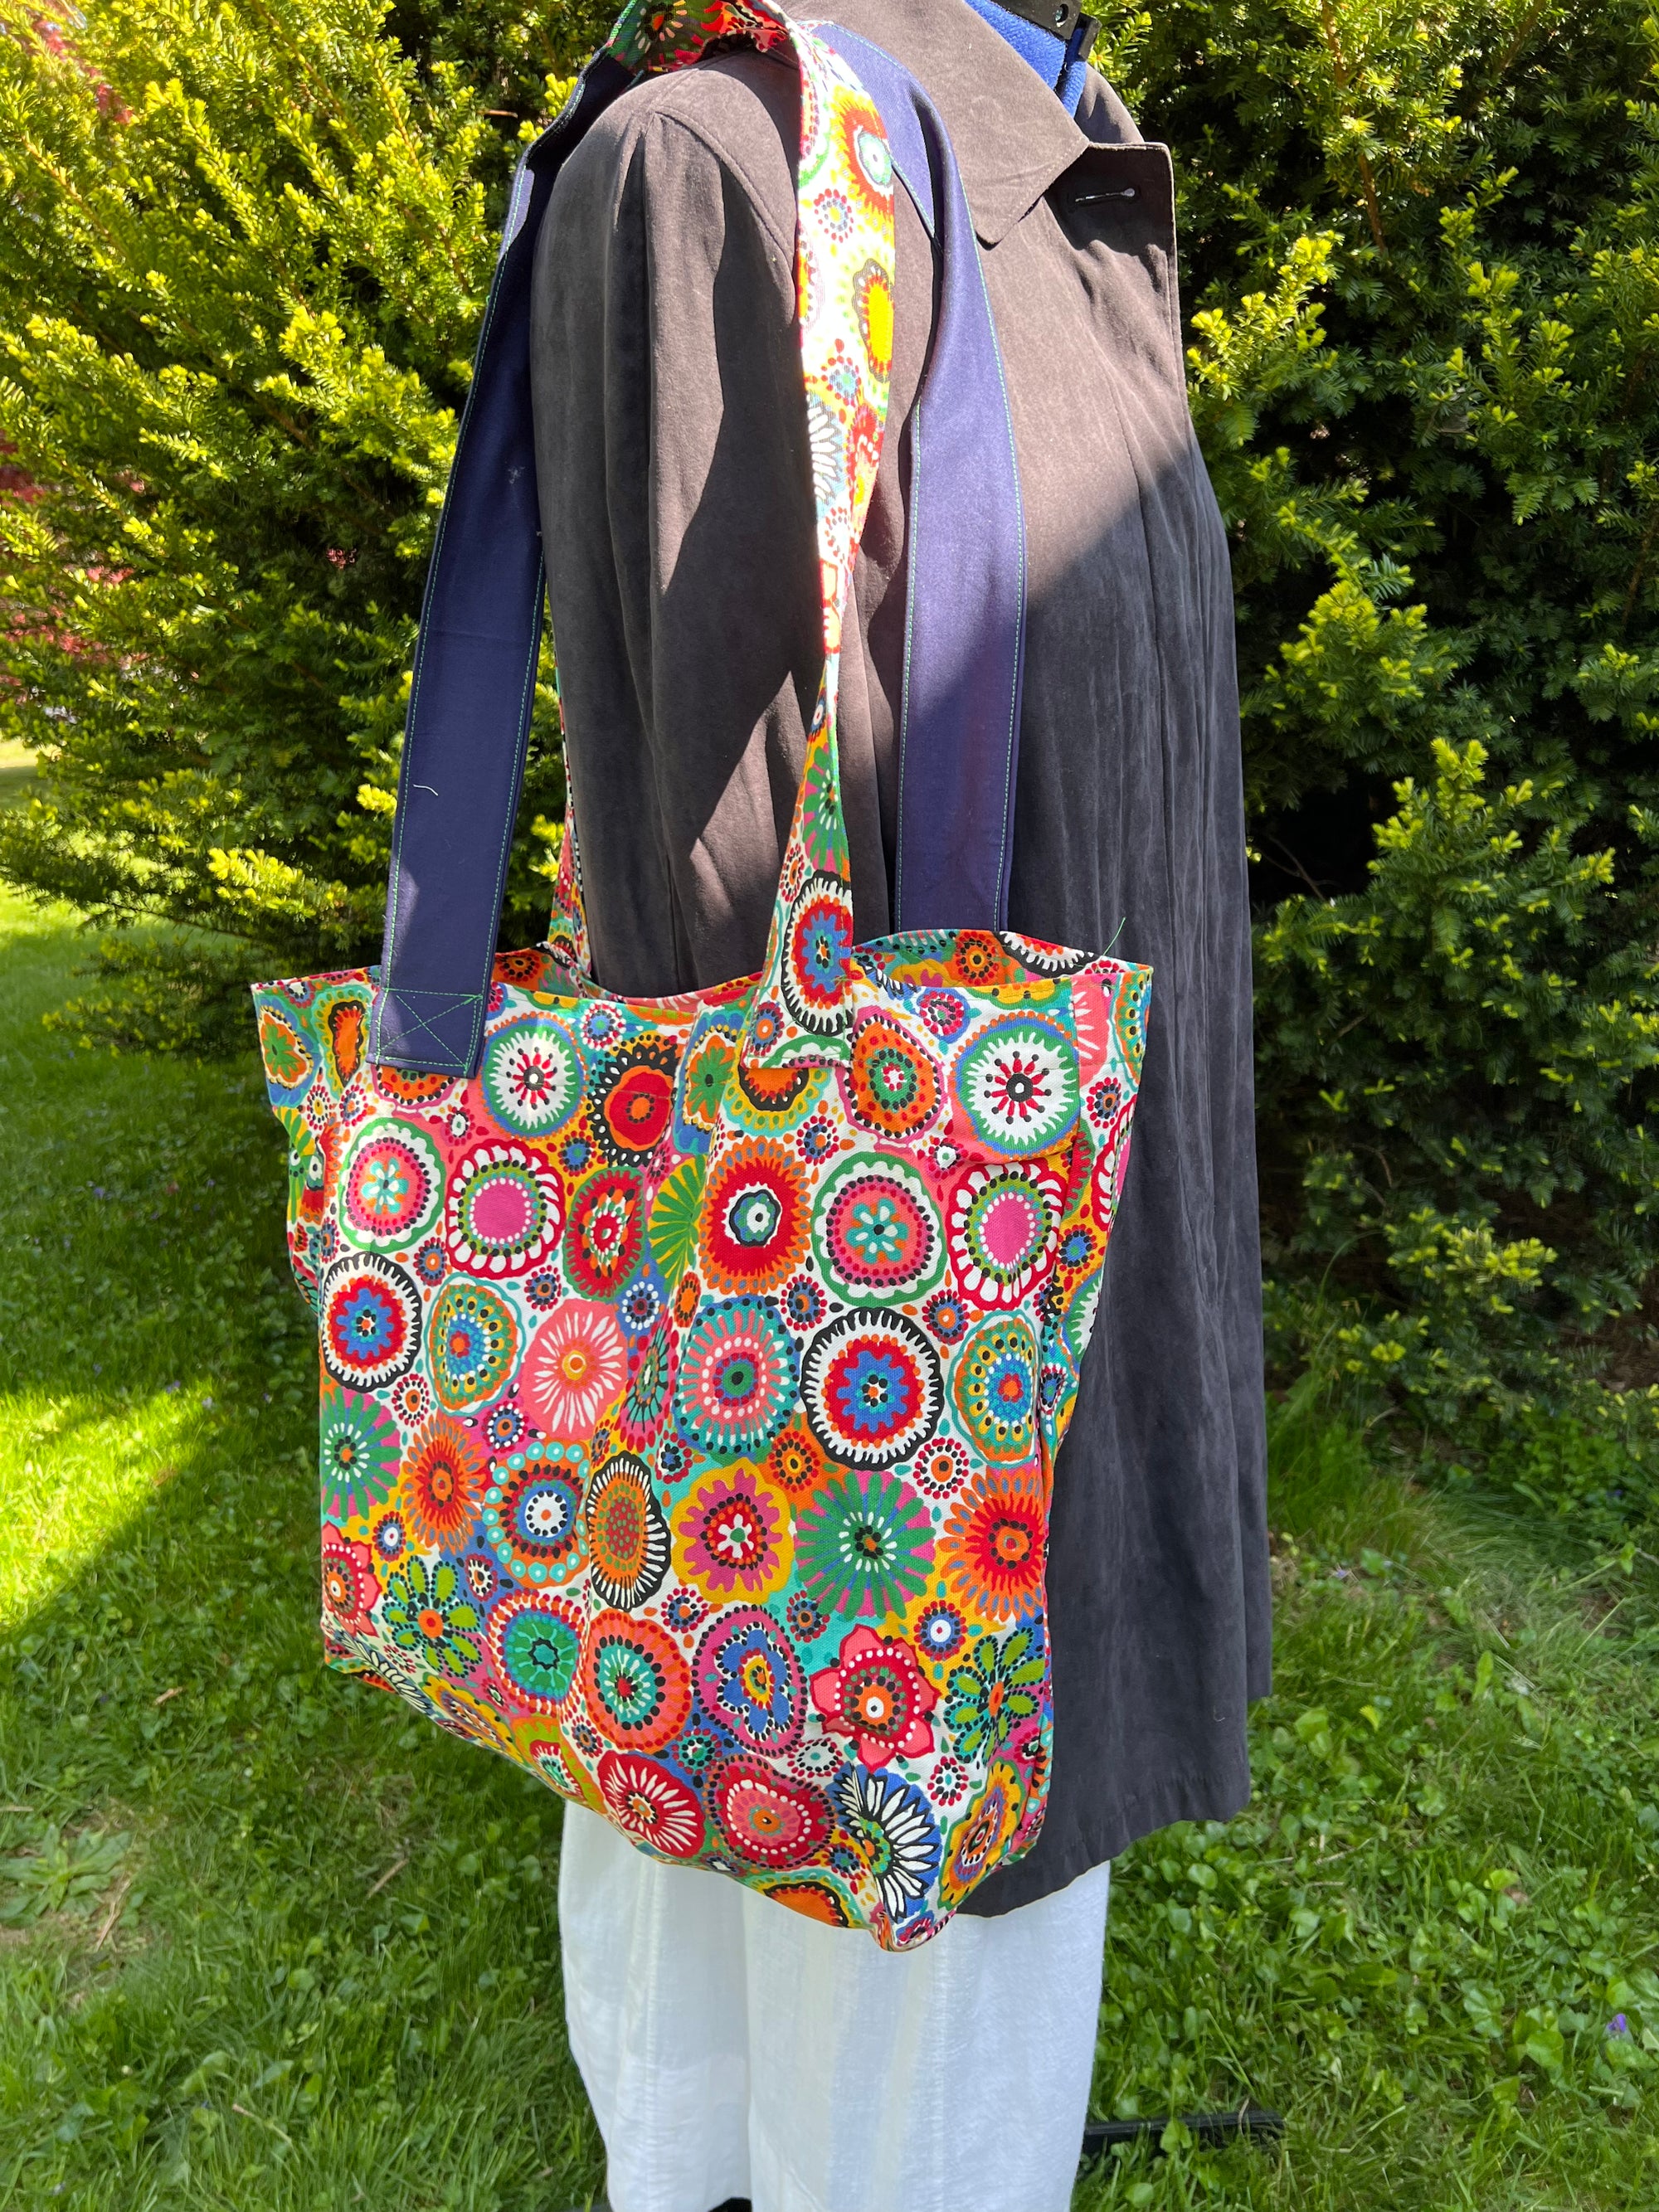 Grocery Market Tote Bag Bright Geometric Floral